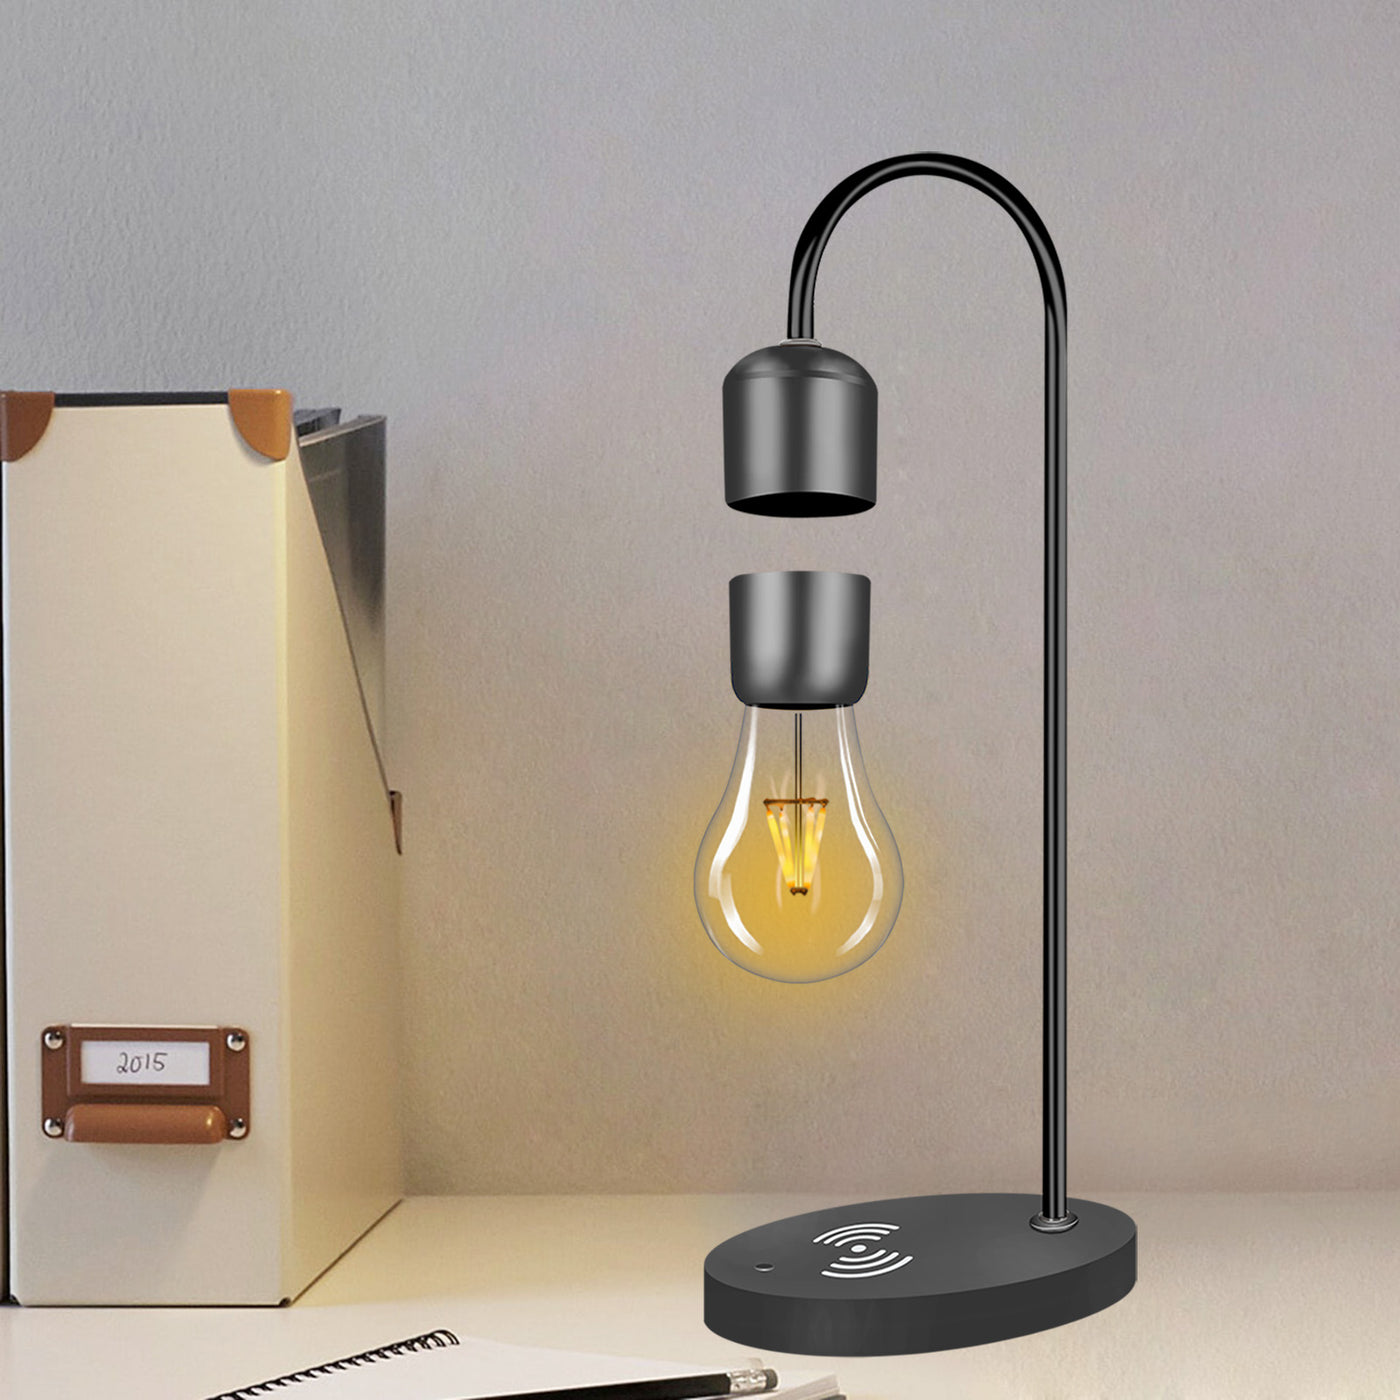 LANGTU Table Desk Smart Lamp with Magnetic Levitating Floating Wireless LED Light Bulb and Wireless Charger Round Base Black